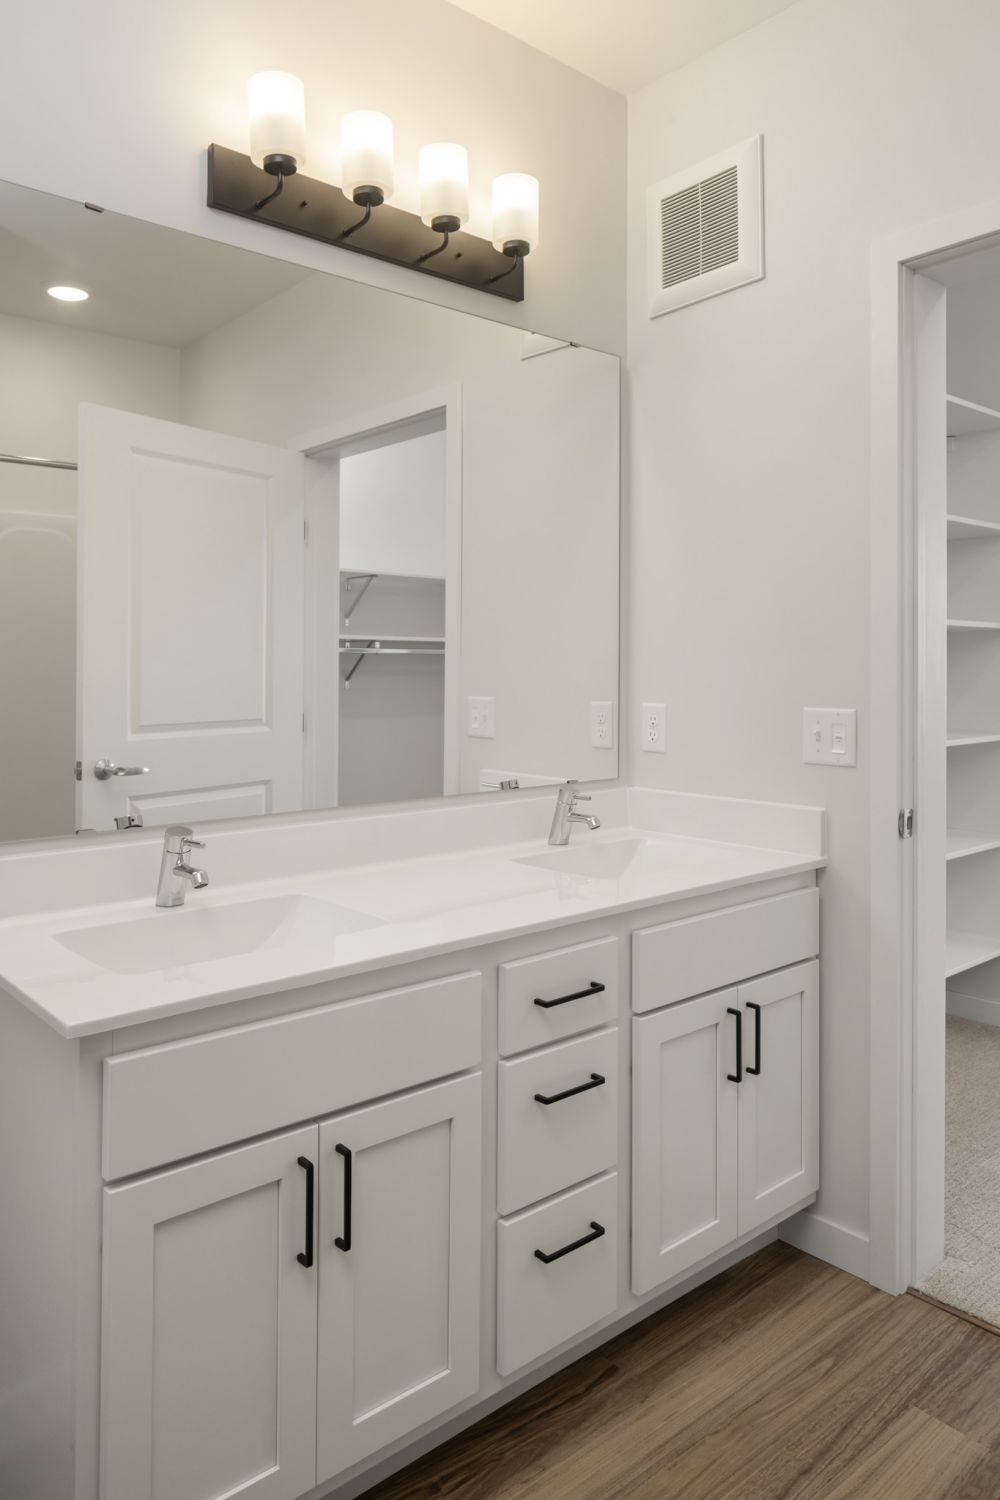 Aster apartments bathroom light finish palette with wood-look LVP flooring and lots of cabinetry for storage